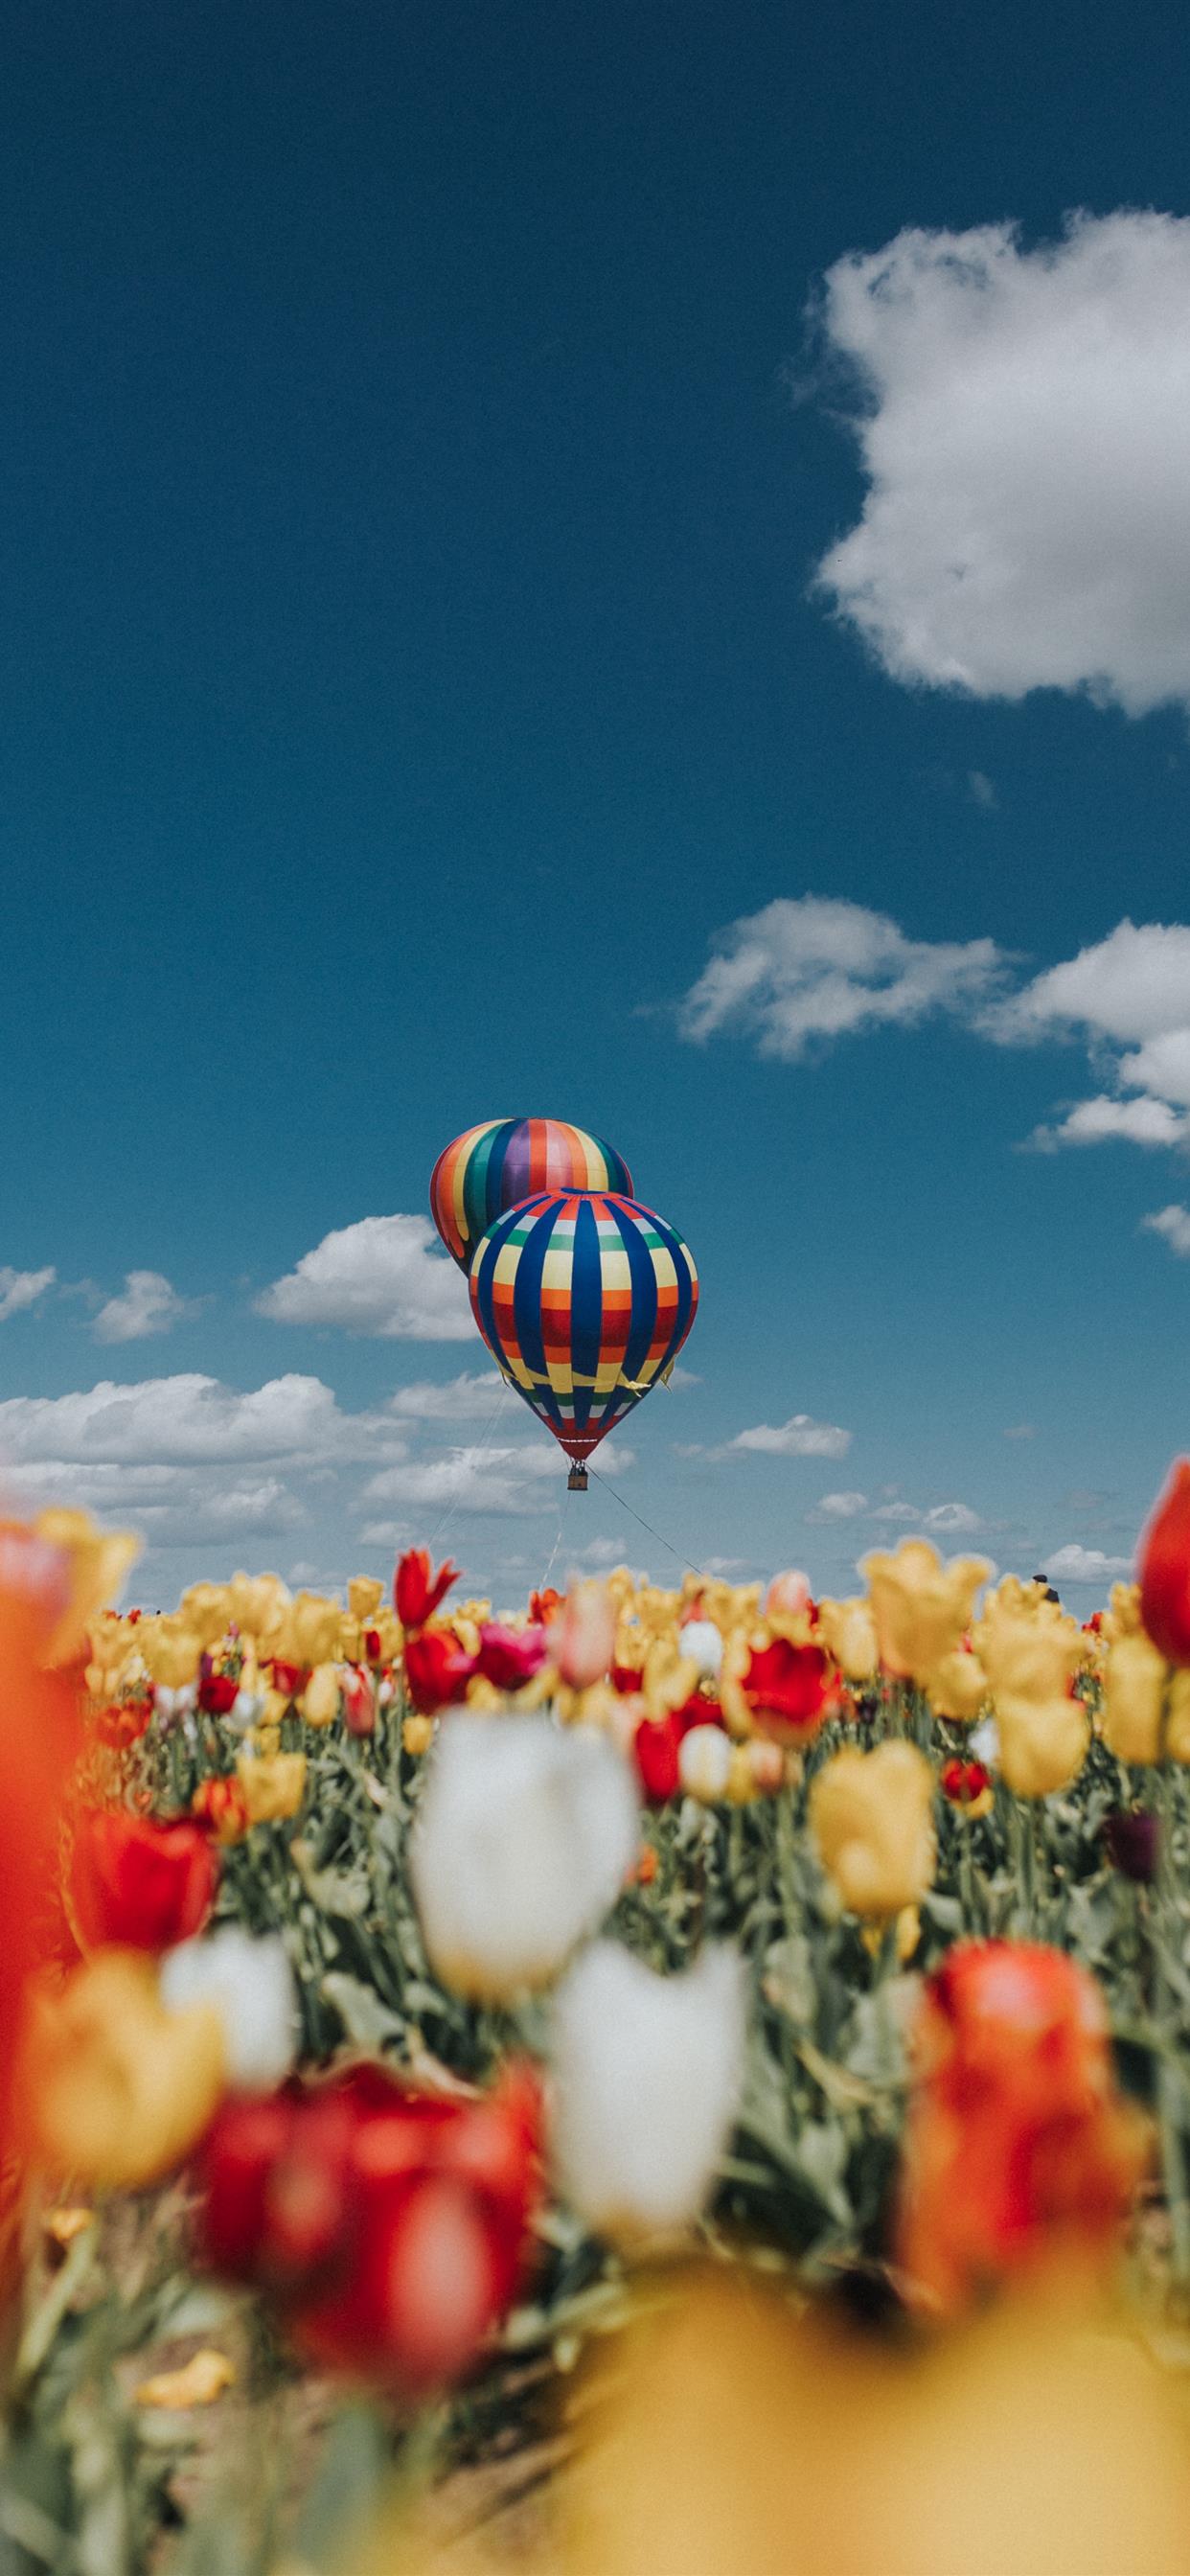 Balloon Over Tulips iPhone 11 Wallpaper Free Download